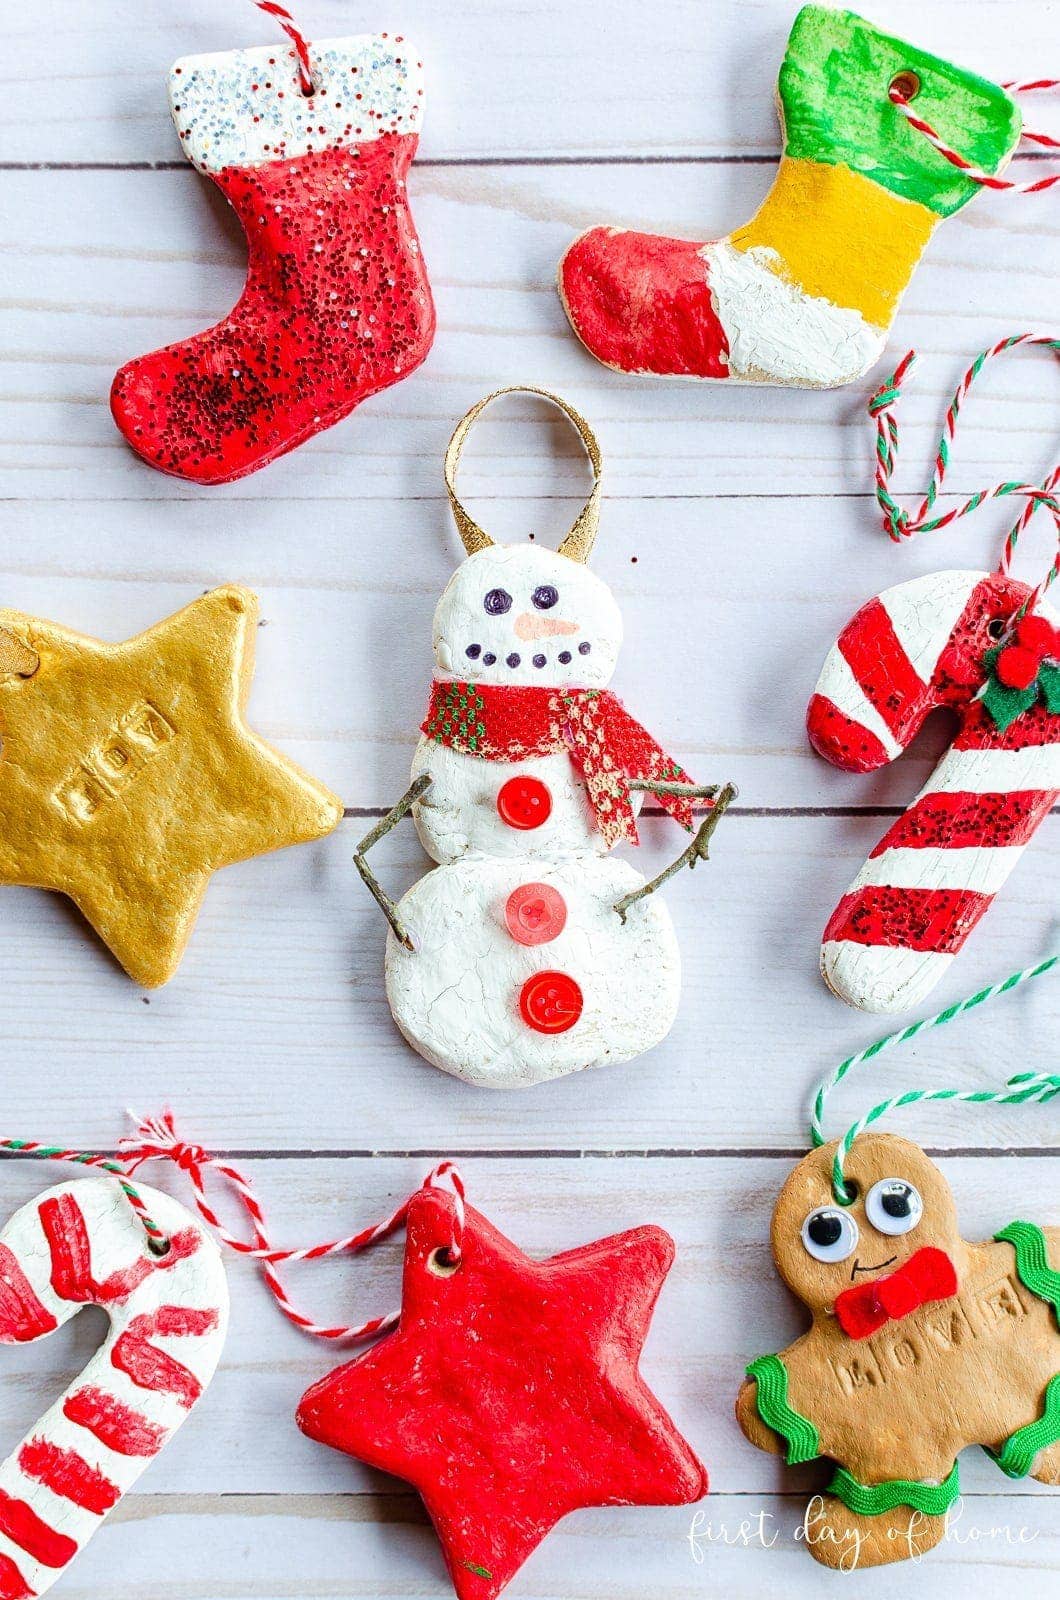 How to Make Salt Dough Ornaments the Kids Will Love